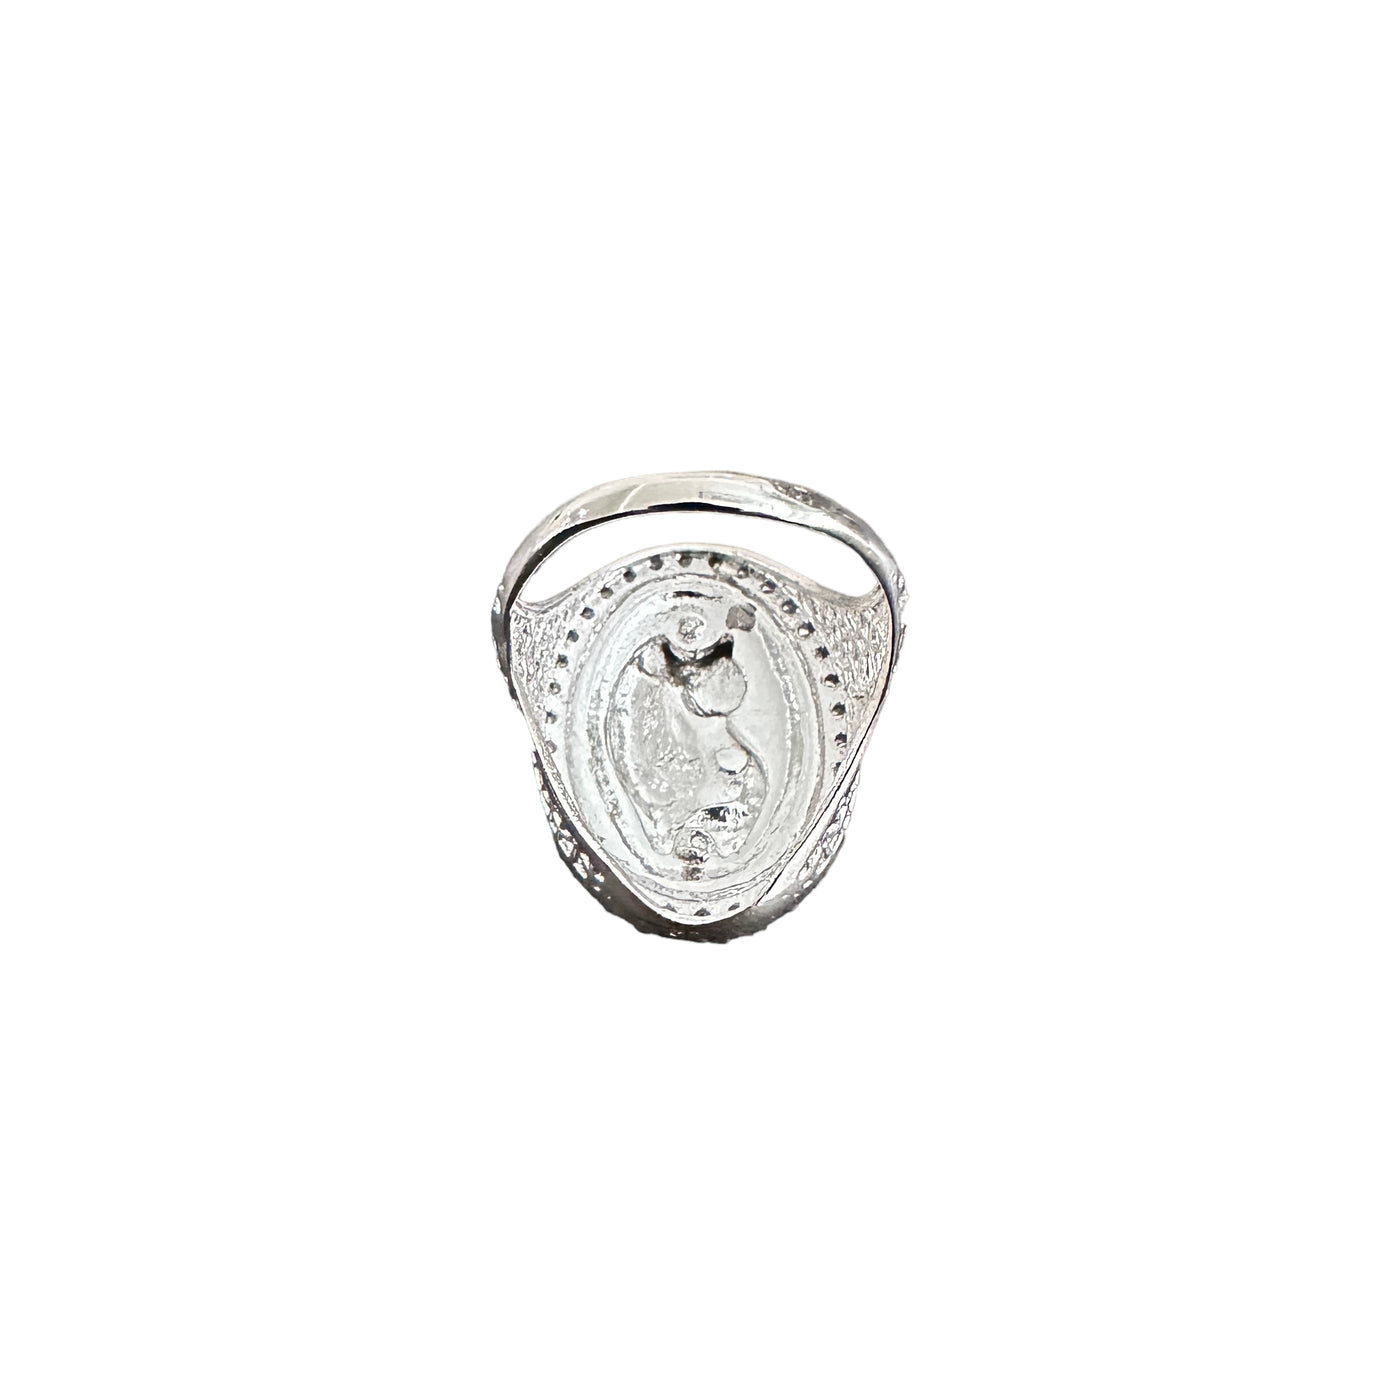 Made in Palestine Coin Replica Sterling Silver Ring